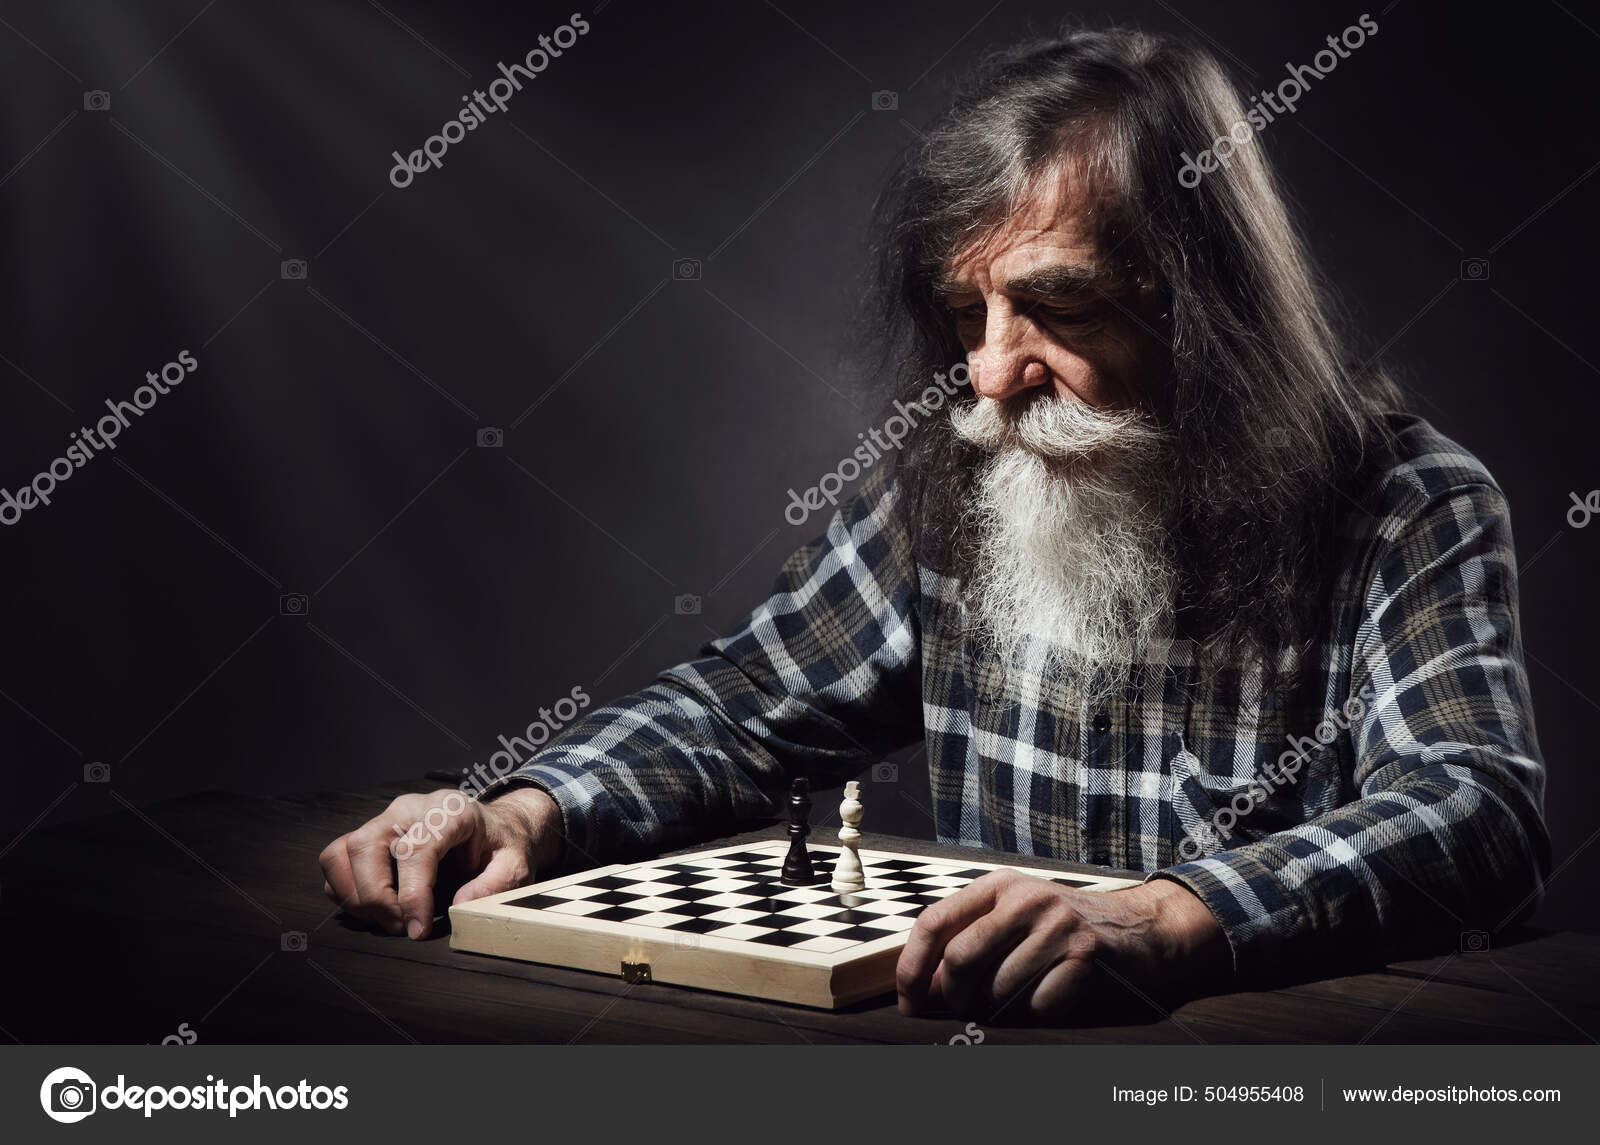 Young pensive man sitting and playing chess online